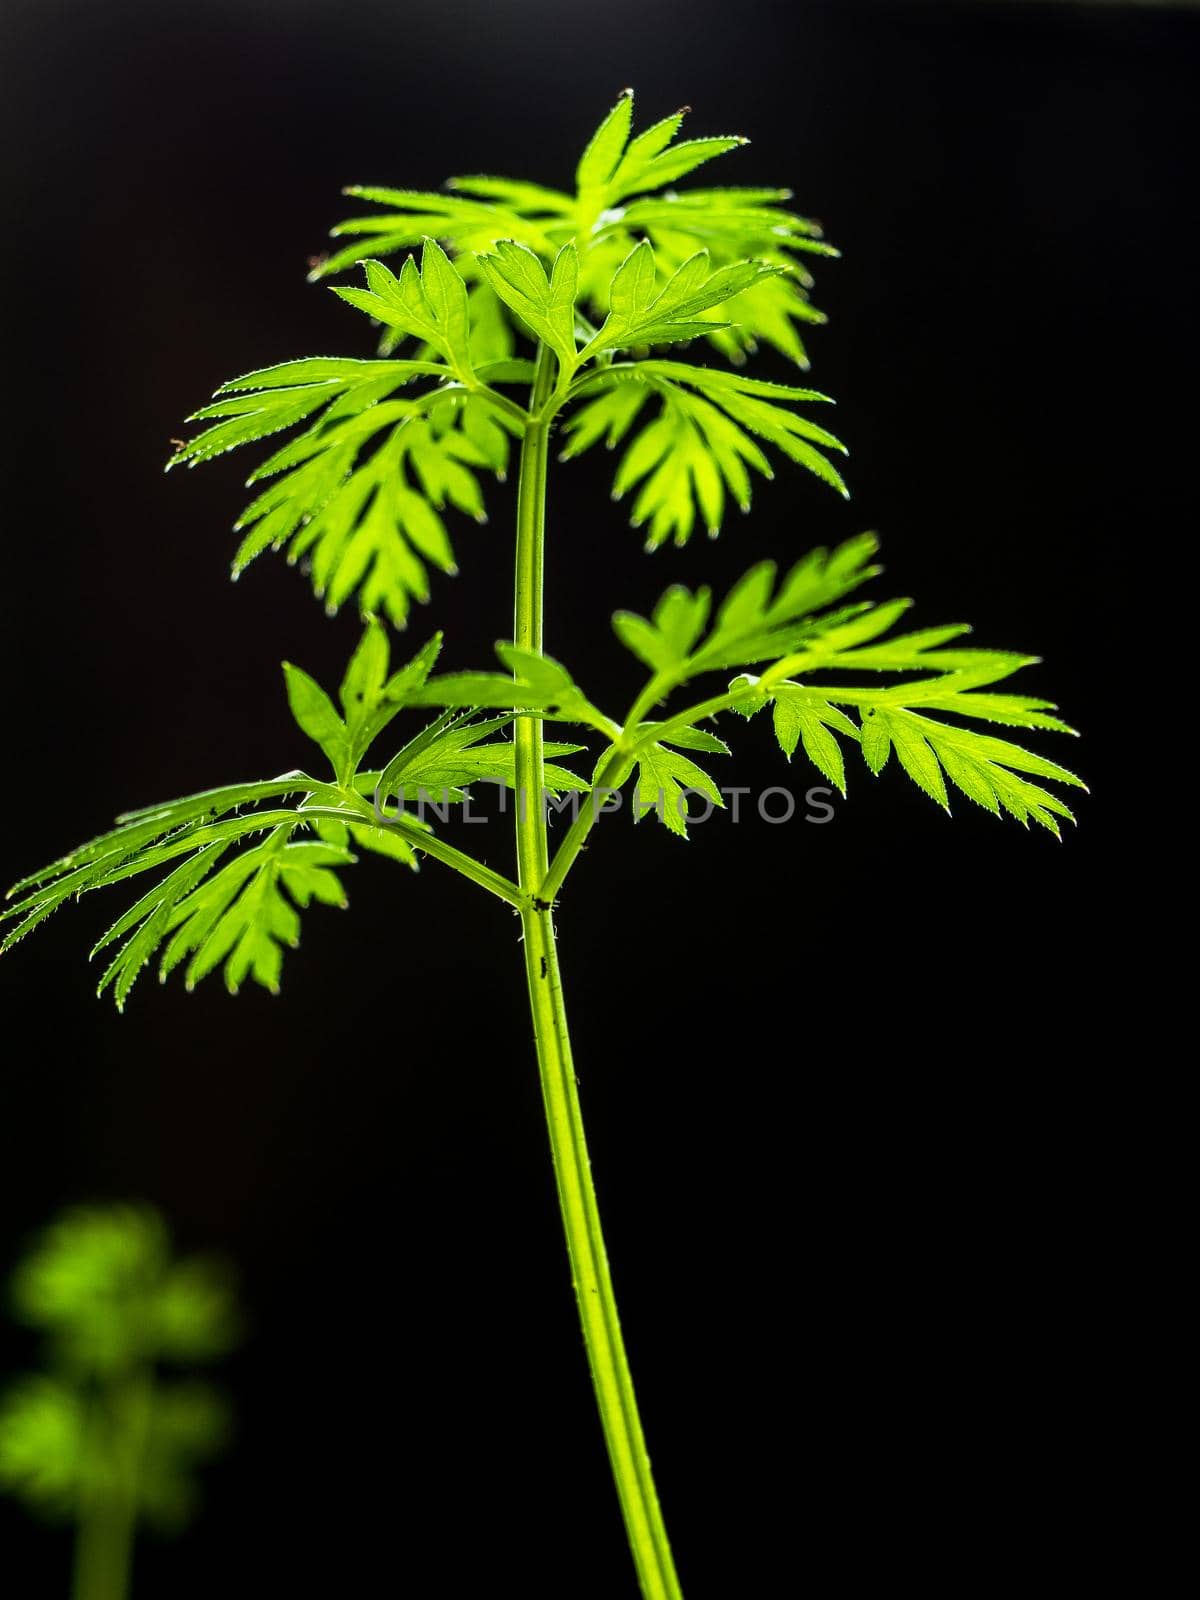 Vertical image. A growing leaf of fresh carrots with green leaves and dirt on a dark background. Daylight.